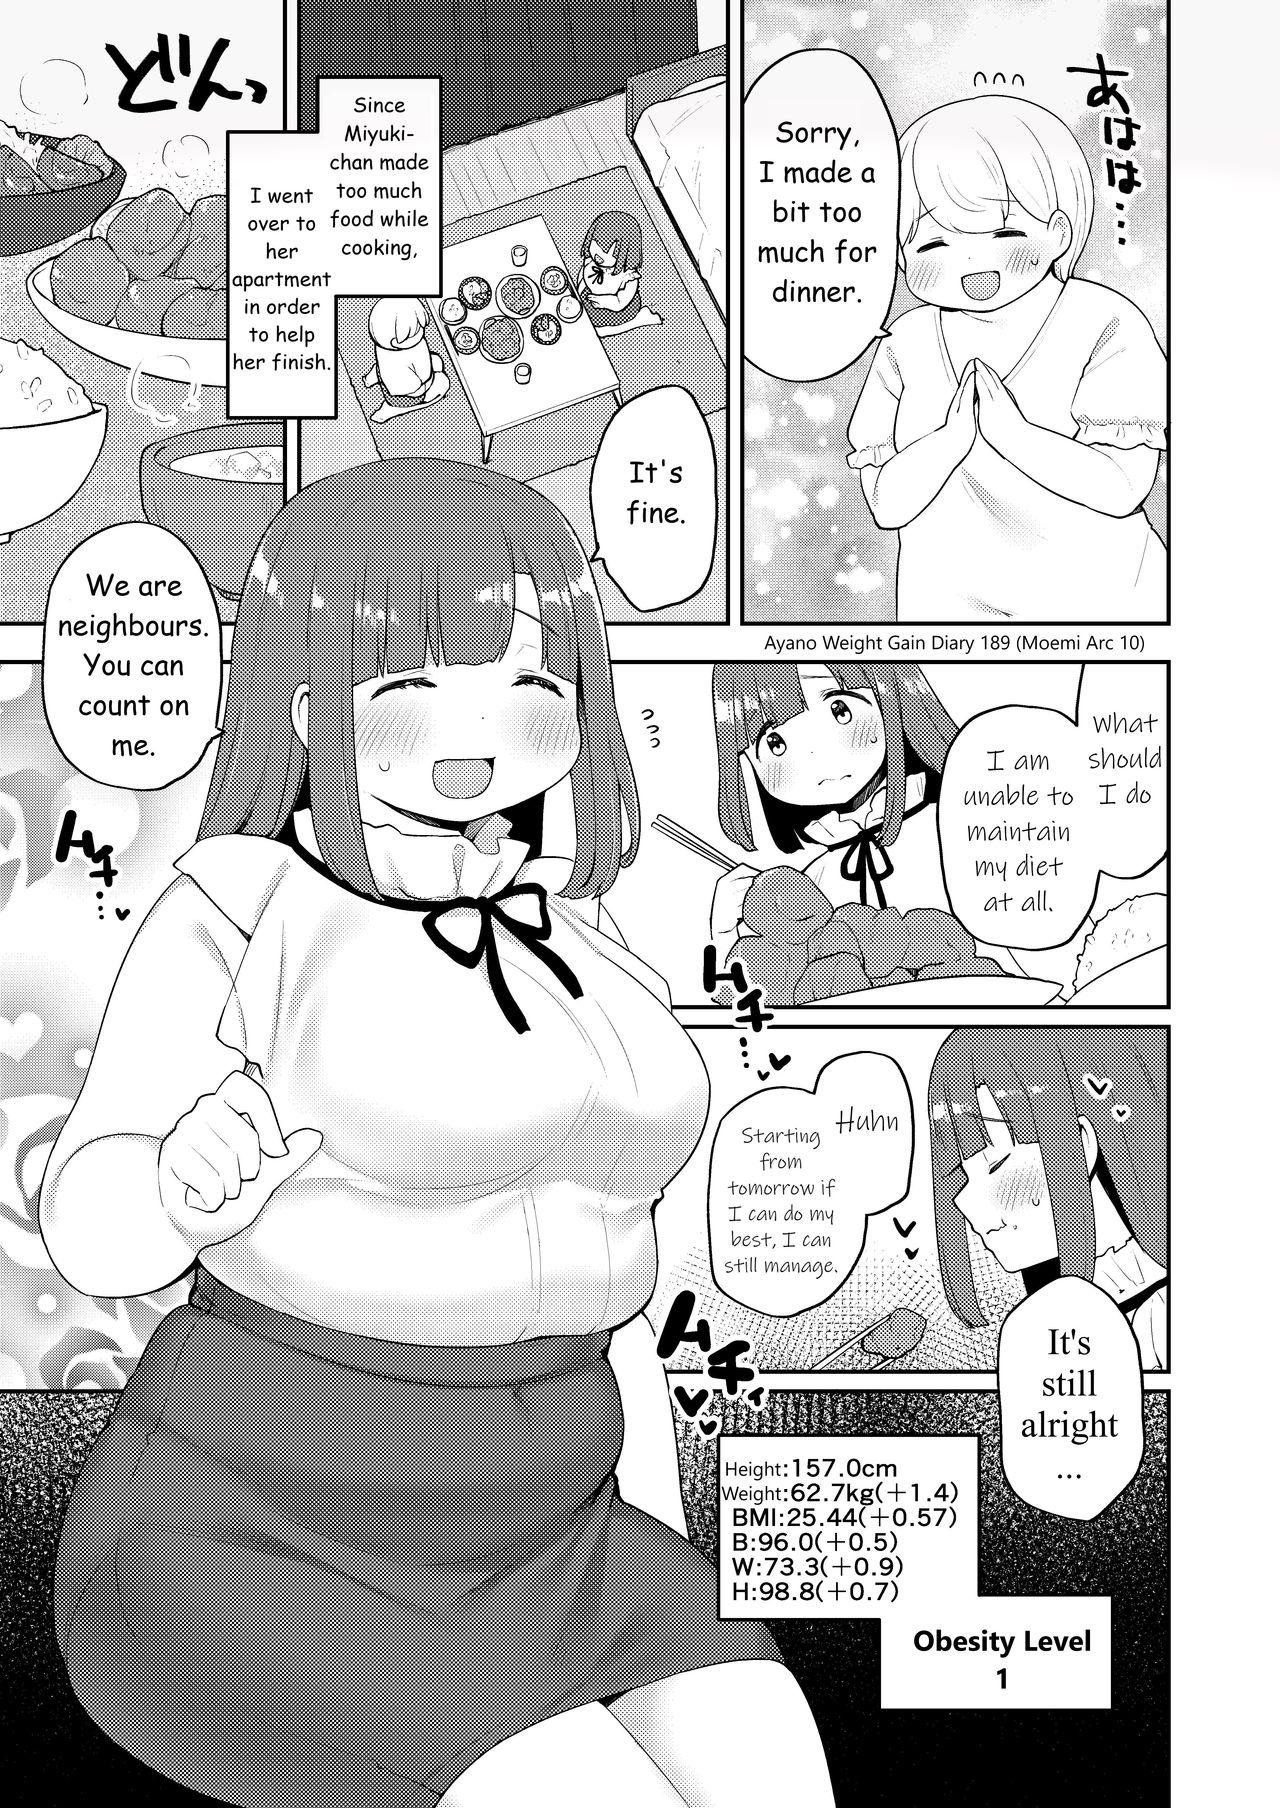 Moneytalks Ayano's Weight Gain Diary Girl - Page 189